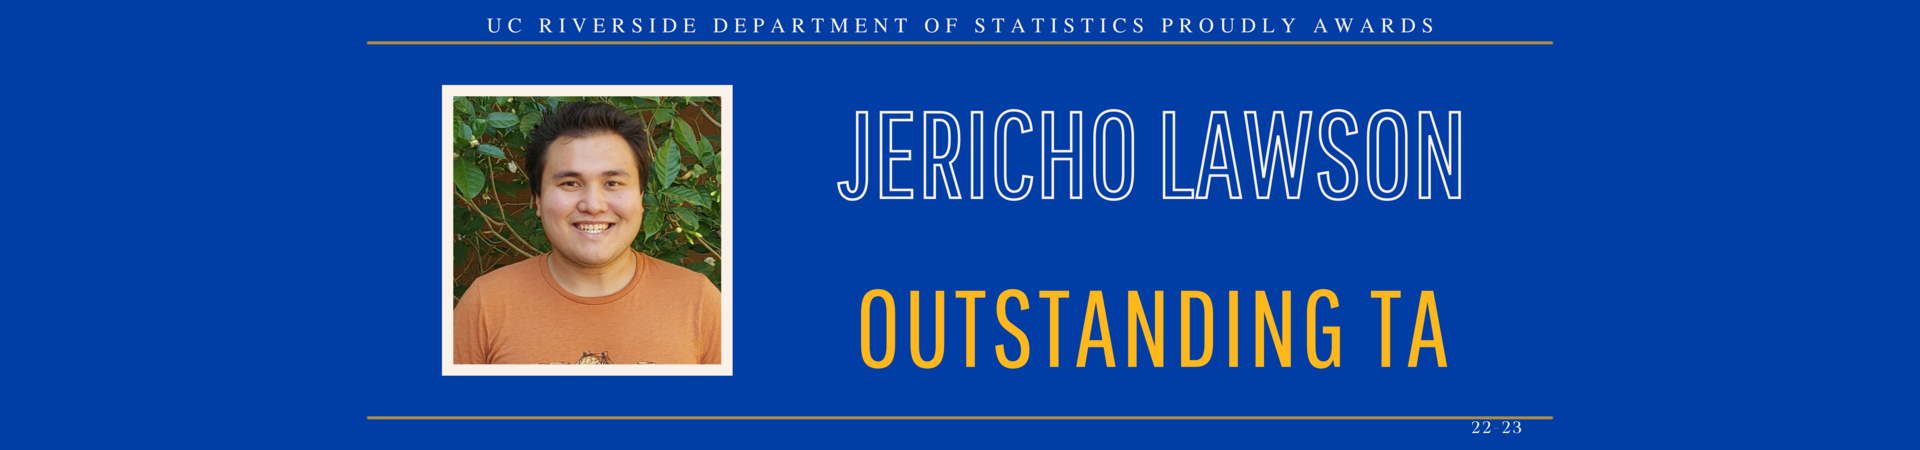 Jericho Lawson awarded the outstanding ta award